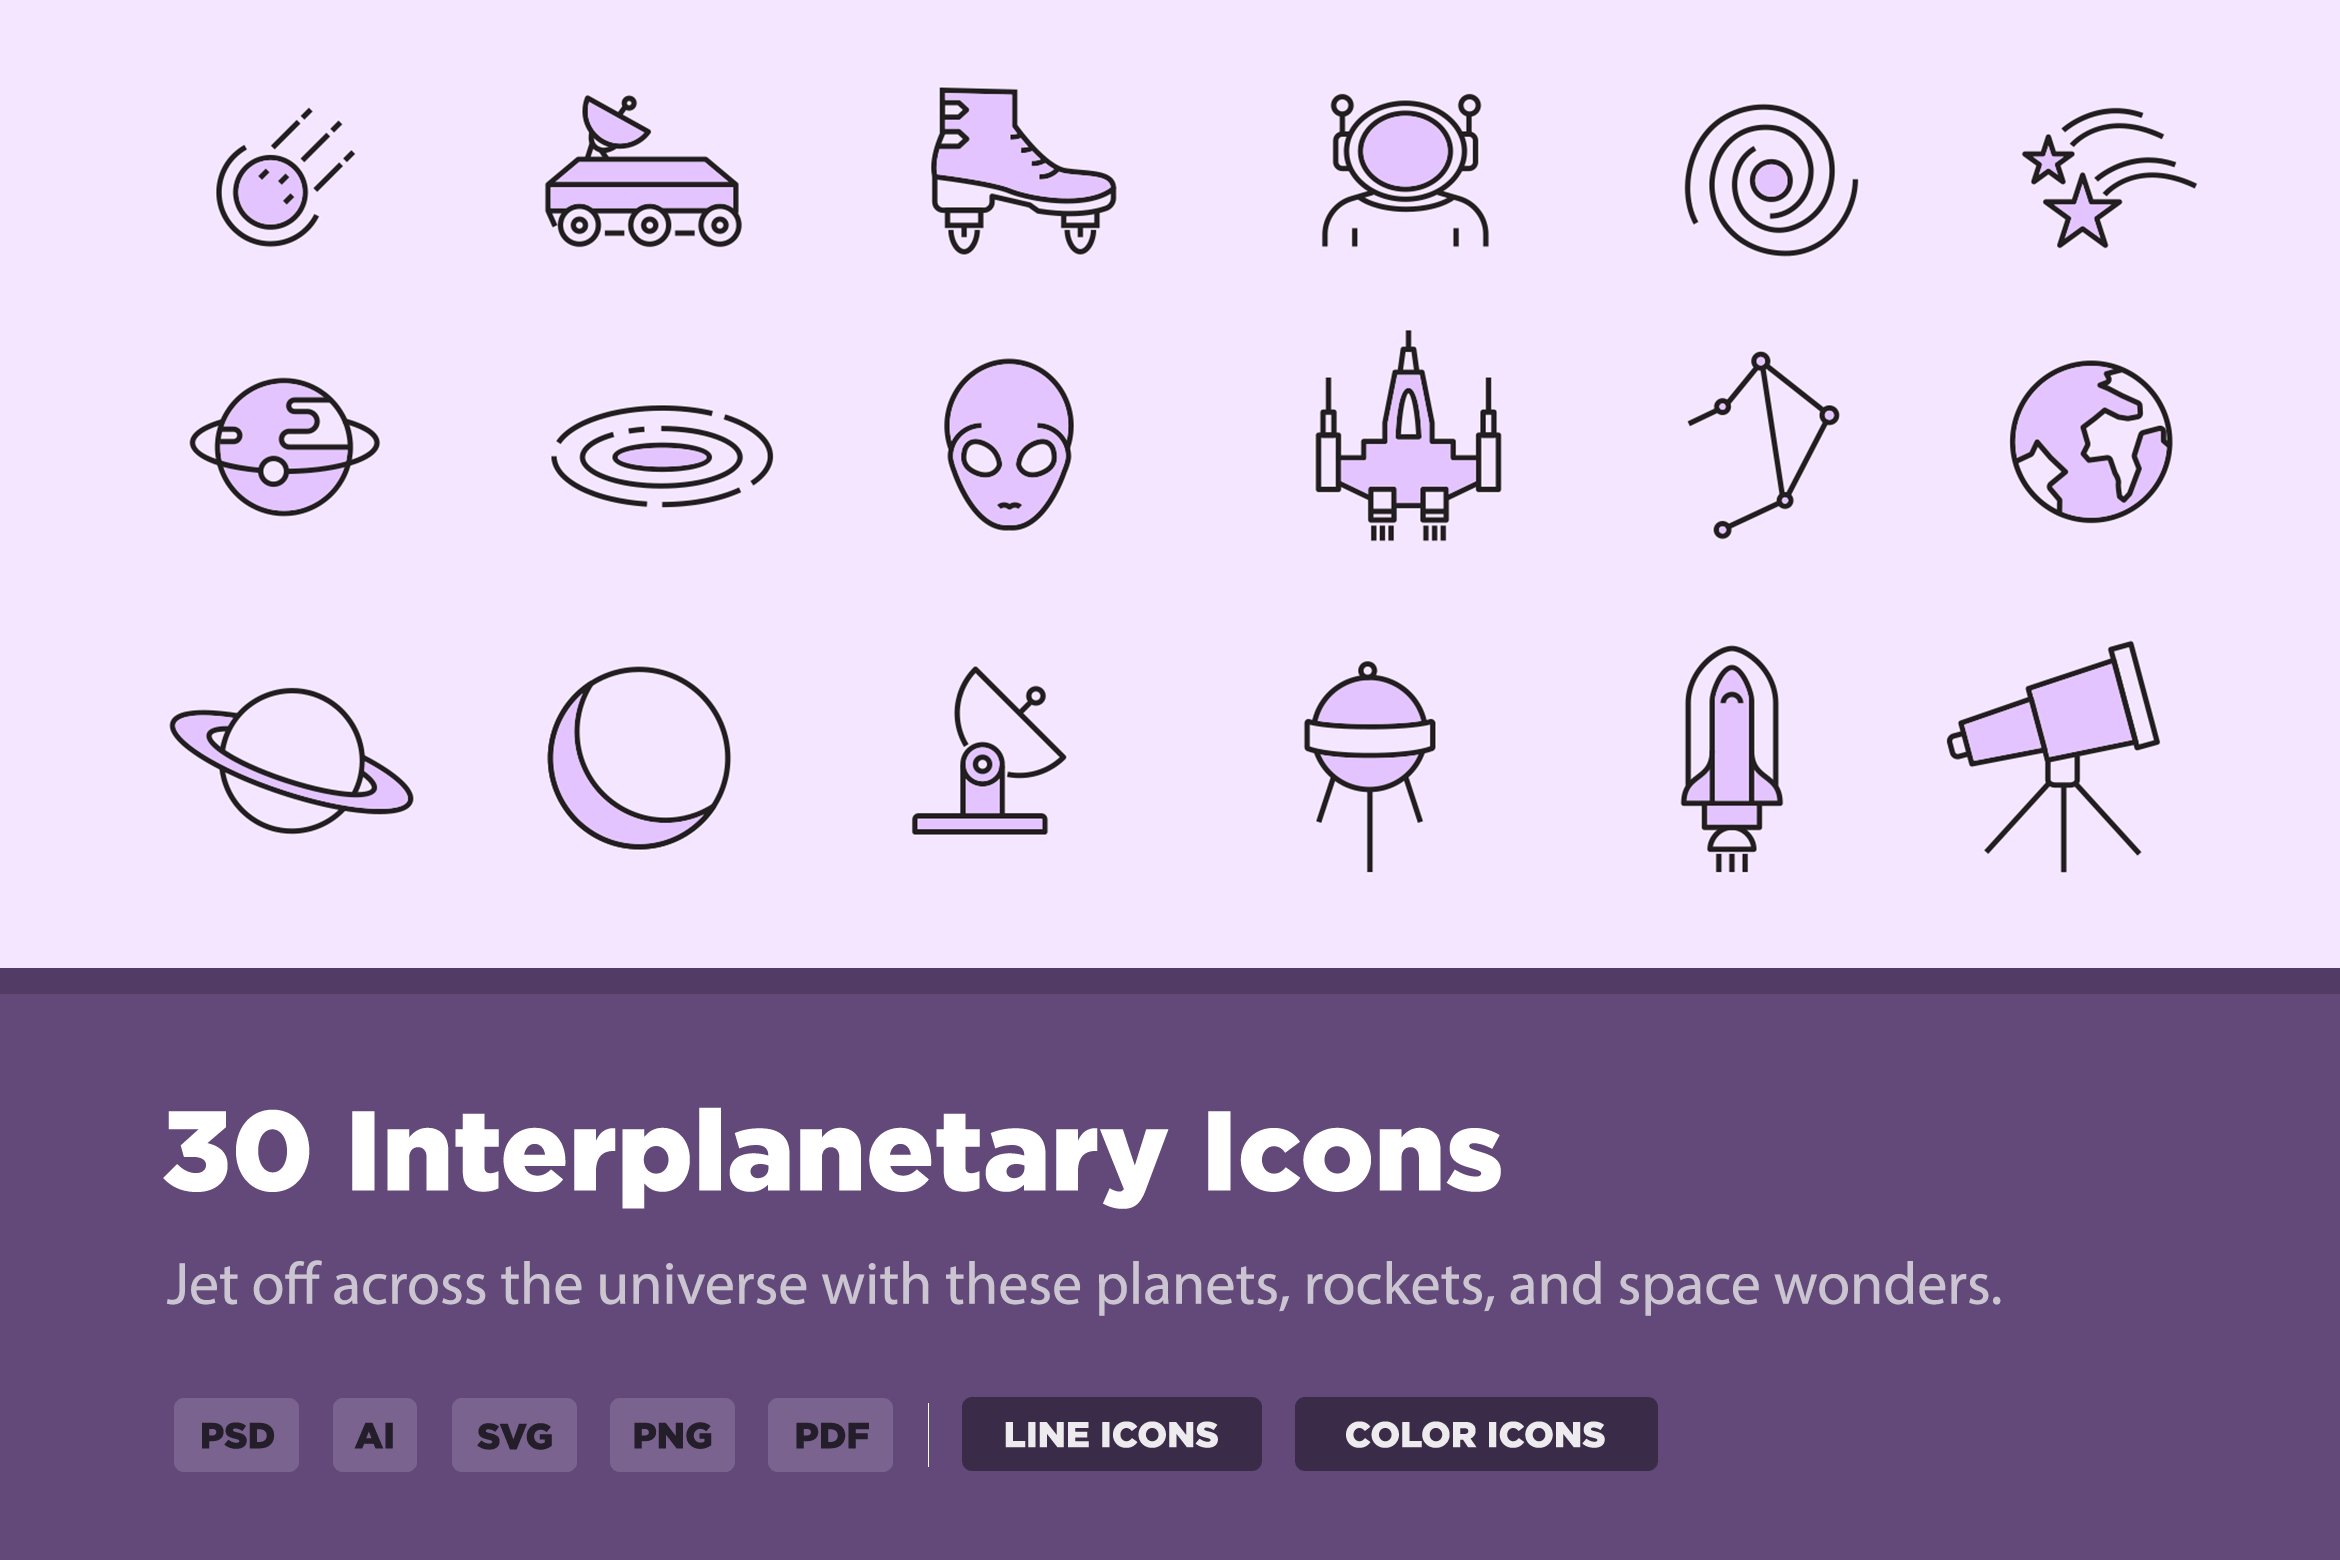 30 Interplanetary Icons cover image.